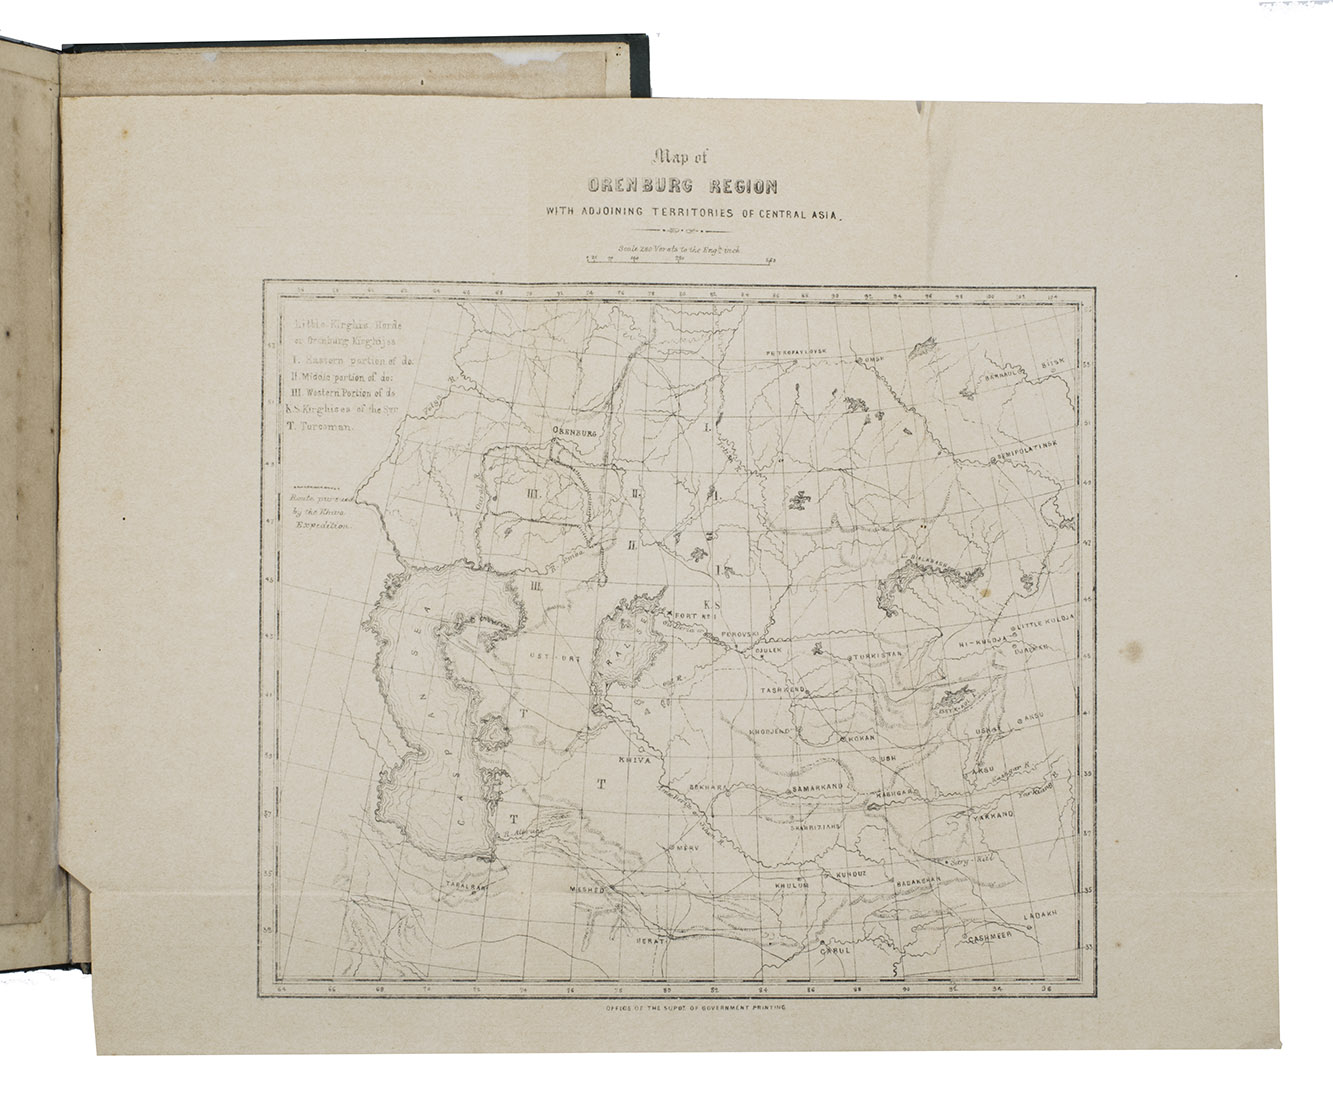 [PEROVSKY, Vasily Aleksyeevic]. - A narrative of the Russian military expedition to Khiva, under General Perofski in 1839.Calcutta, Office of superintendent government printing, 1867. 8. With 1 folding plate (plan of the camp, with the positions of the troops) and 1 folding map of the region Orenburg, Kazachstan. Original publishers green cloth; re-backed with original backstrip laid down.